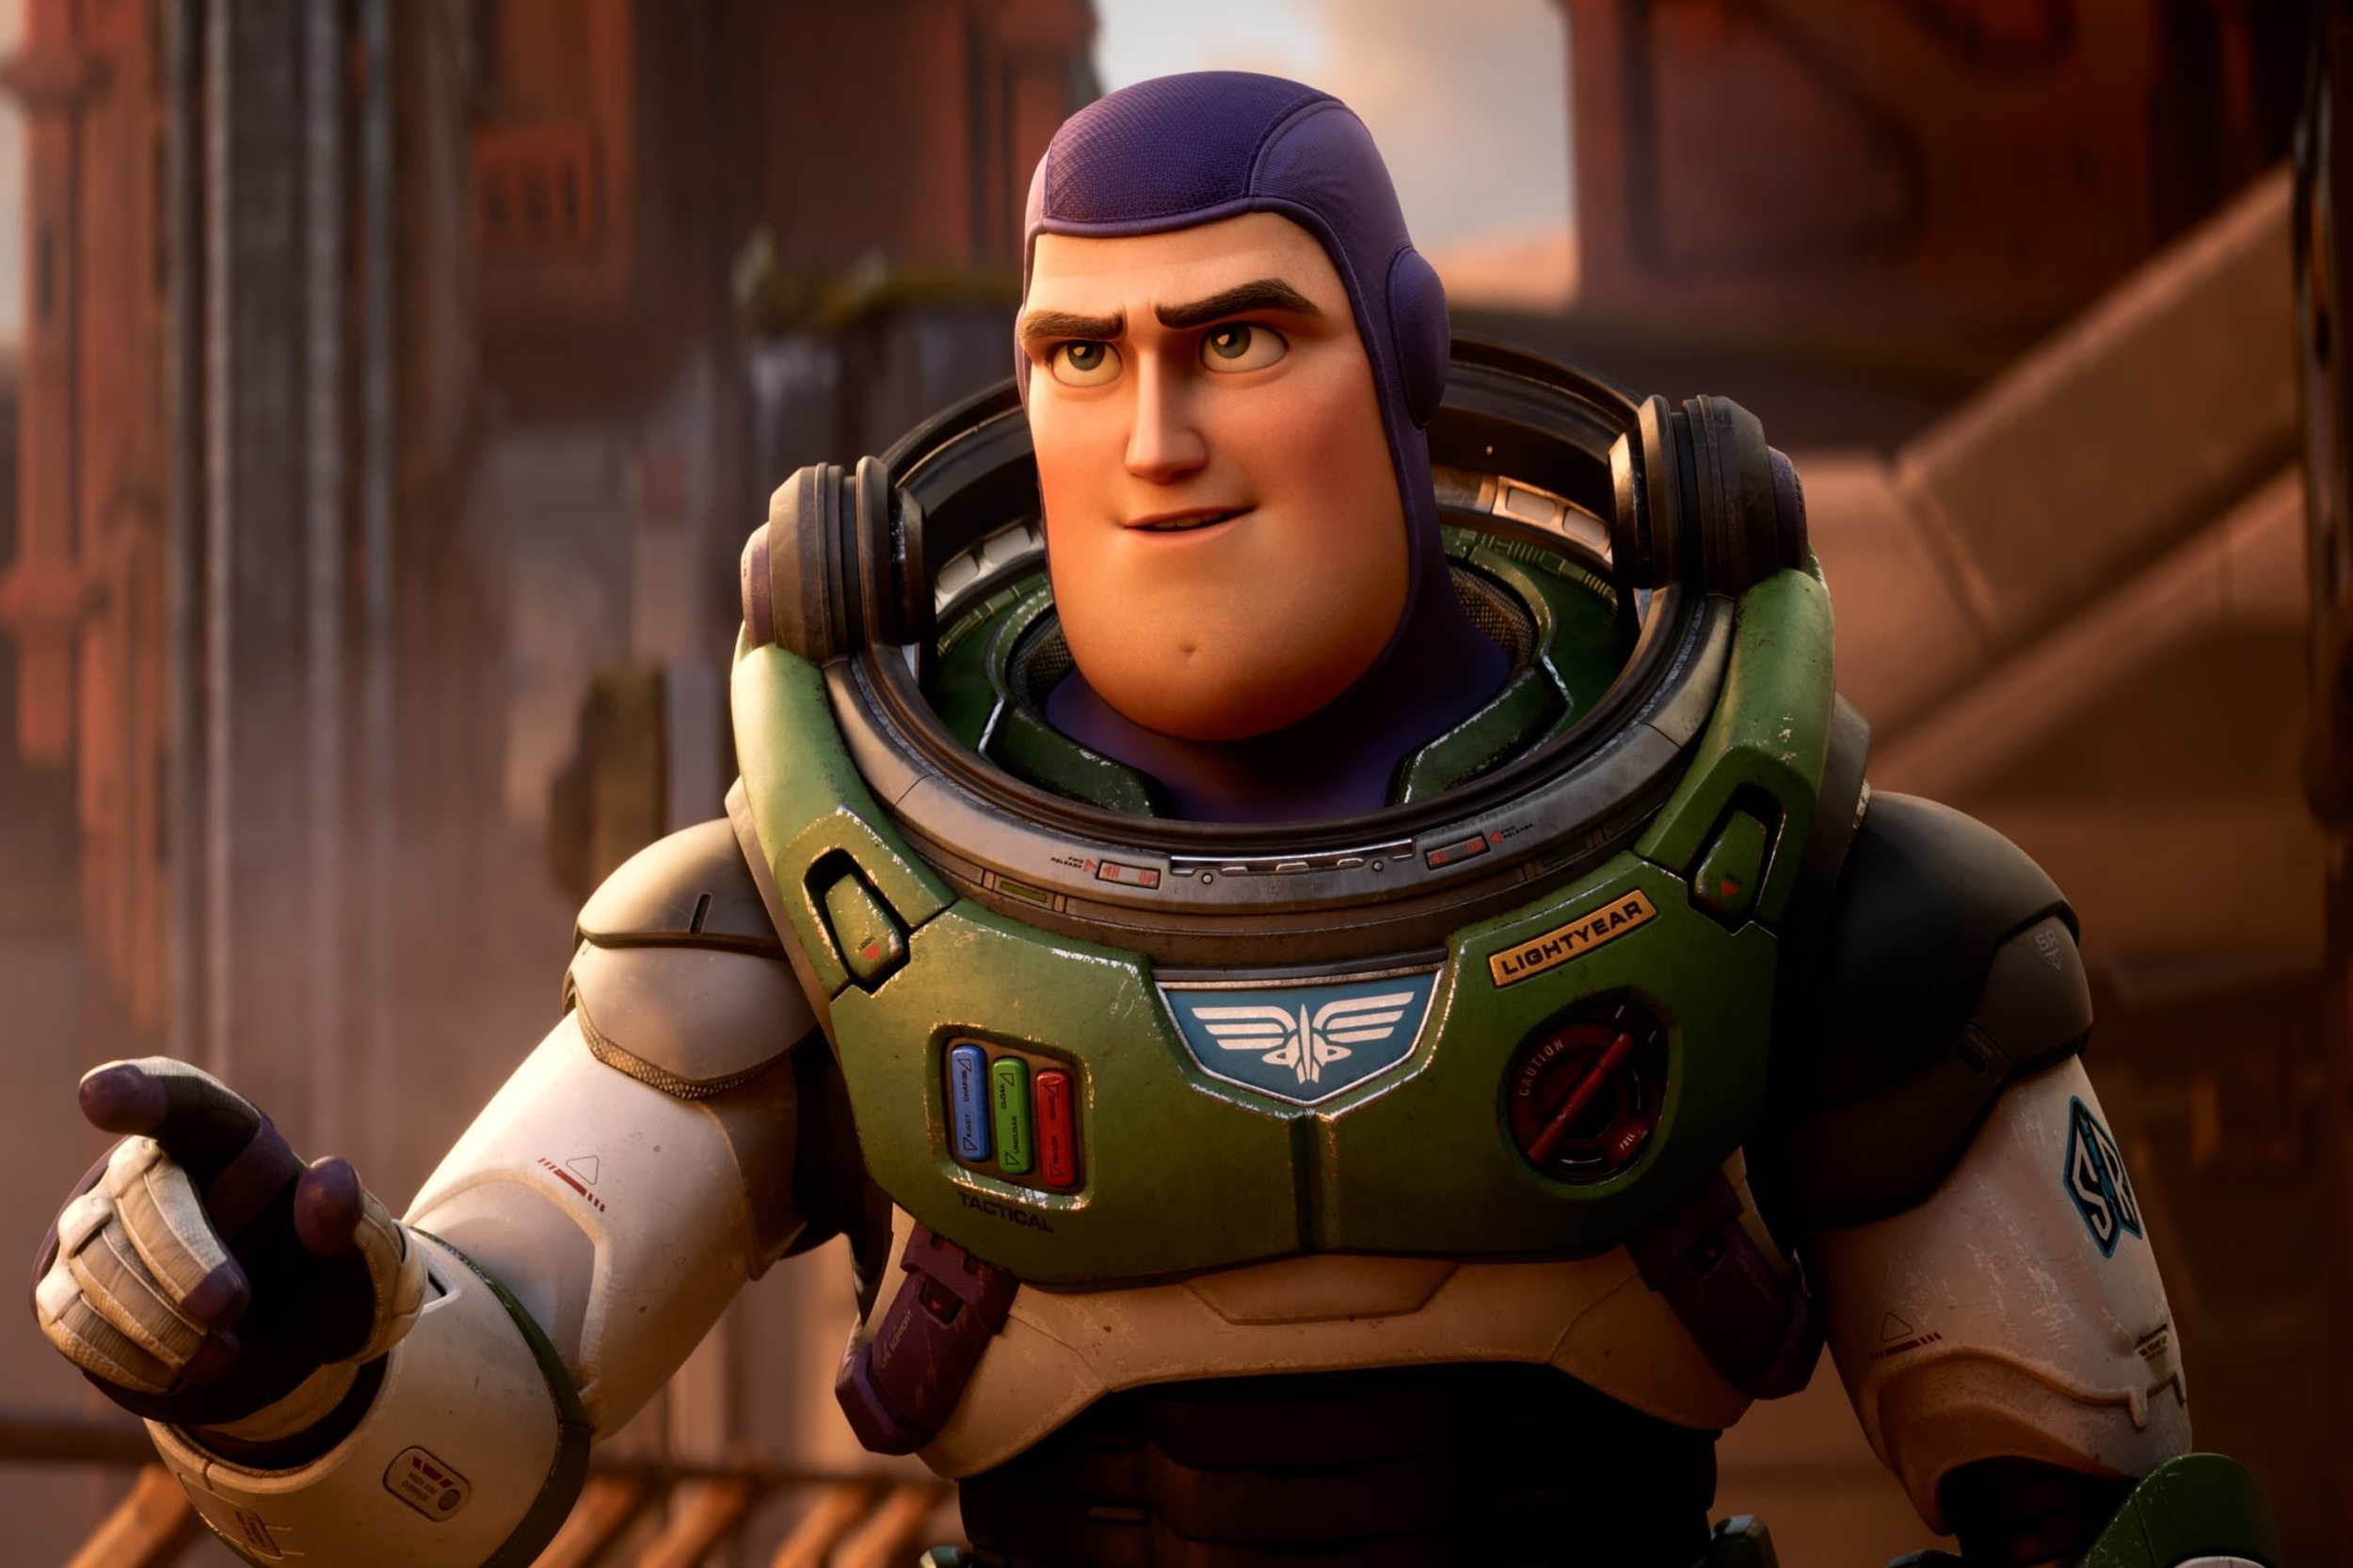 ‘Lightyear’ Coming To Disney+ Next Month